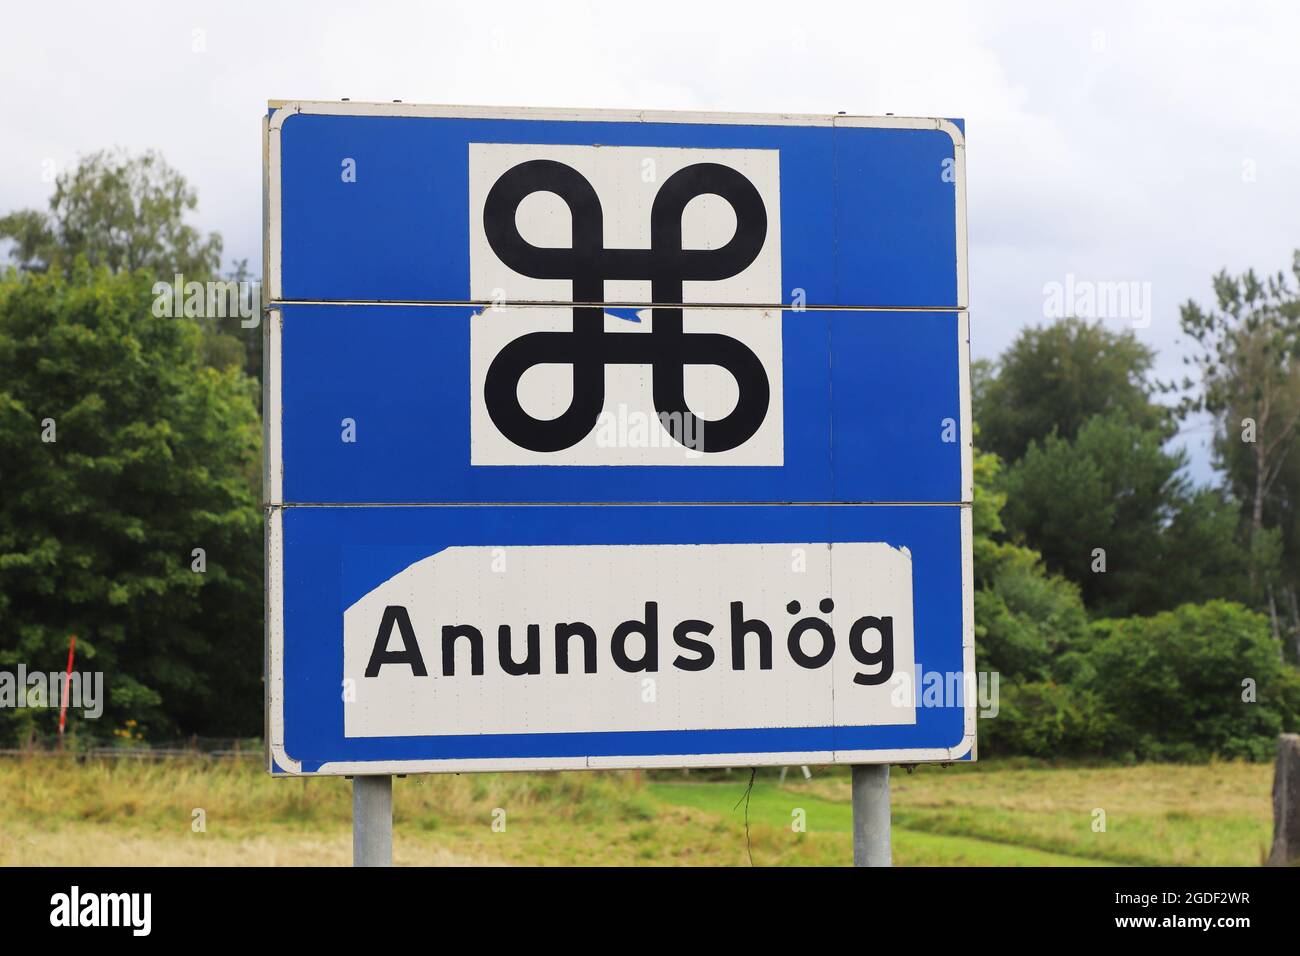 Road sign at the tumulus  Anundshog  hertiage site near Vasteras in Swedish province of Vastmanland. Stock Photo